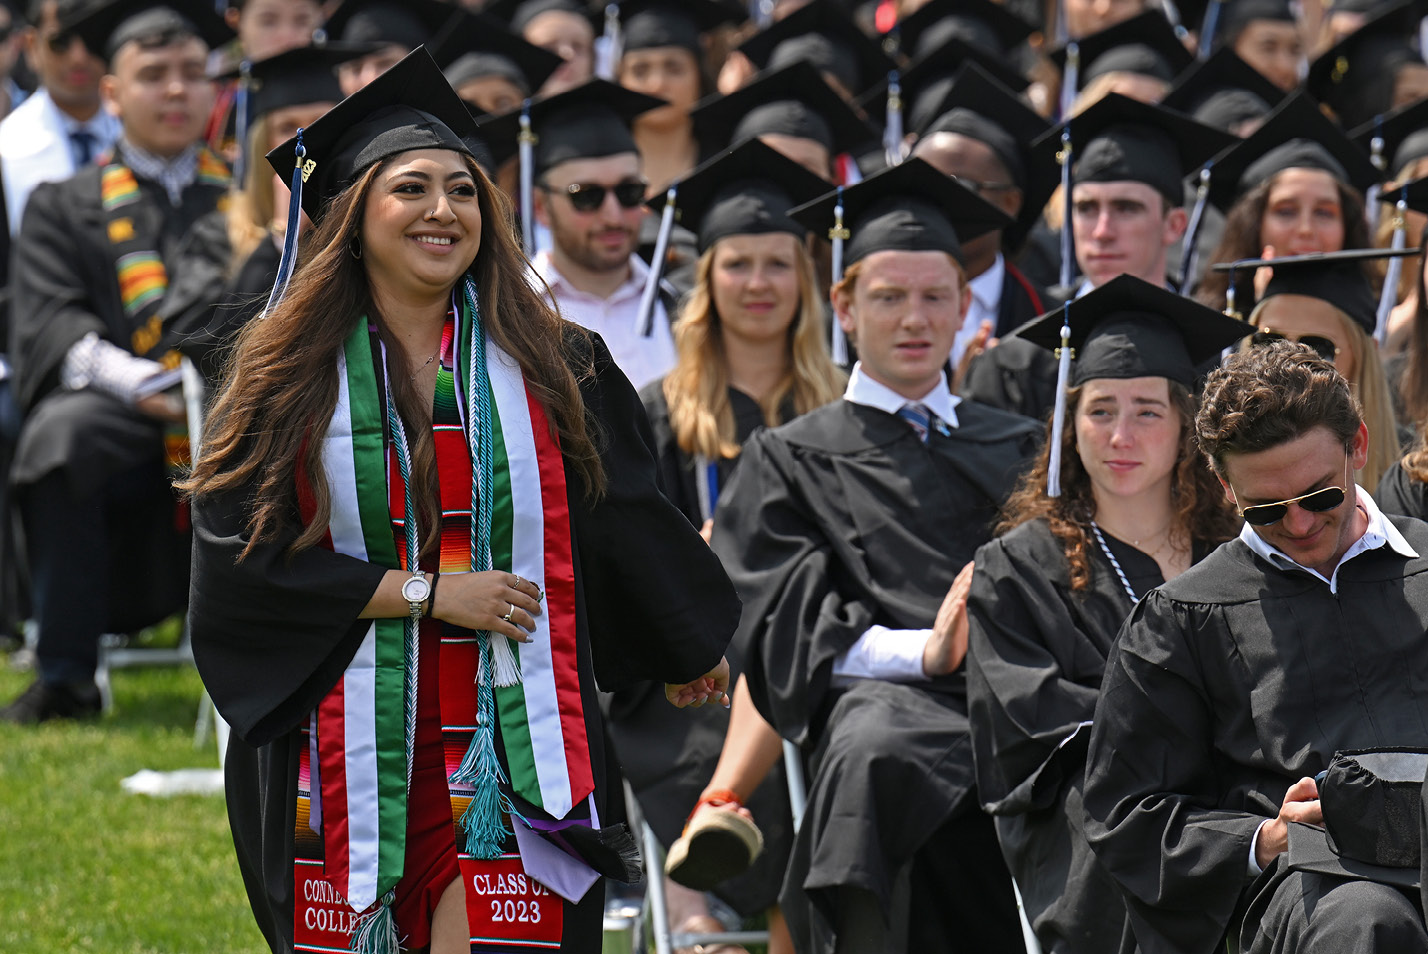 A student walks to receive her diploma at Commencement 2023.